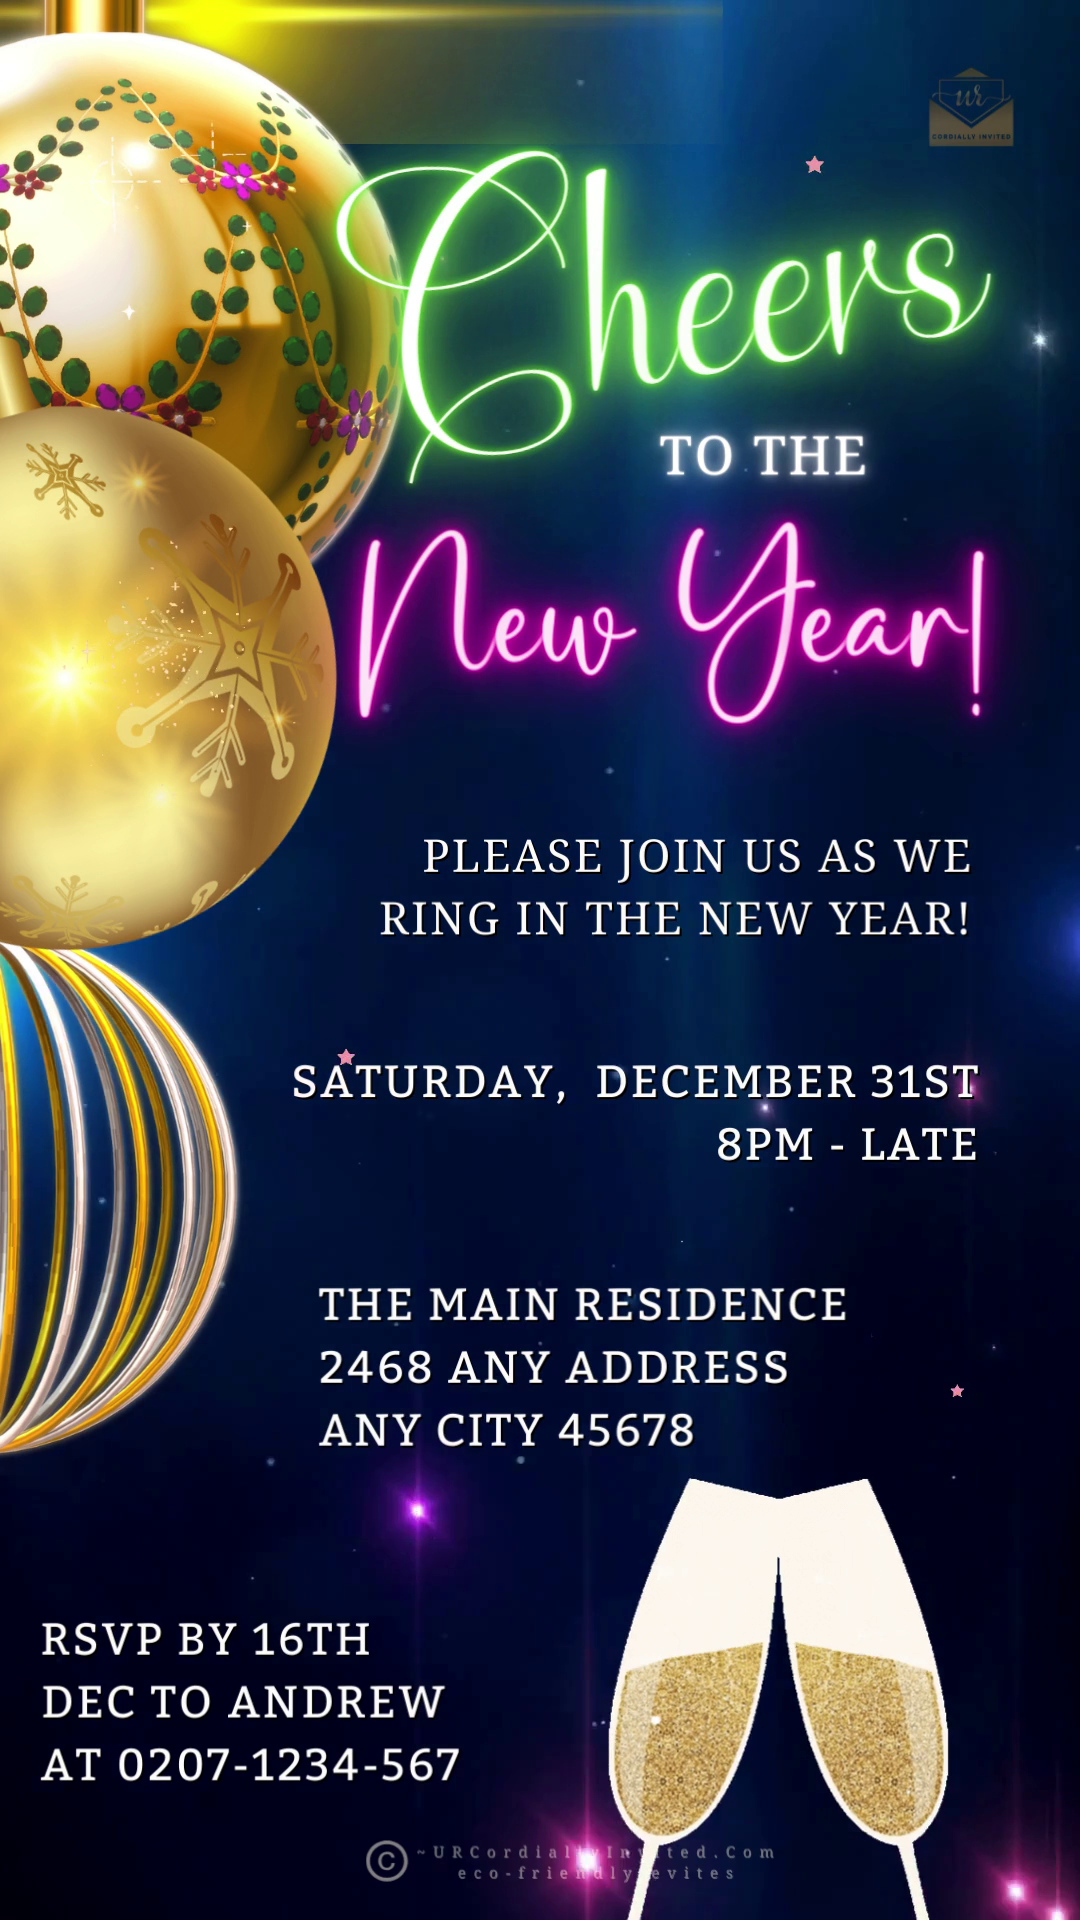 Ornamental digital invitation featuring gold Christmas ornament, champagne glasses, and neon lights for New Year's Eve party. Editable in Canva for easy personalization and electronic sharing.